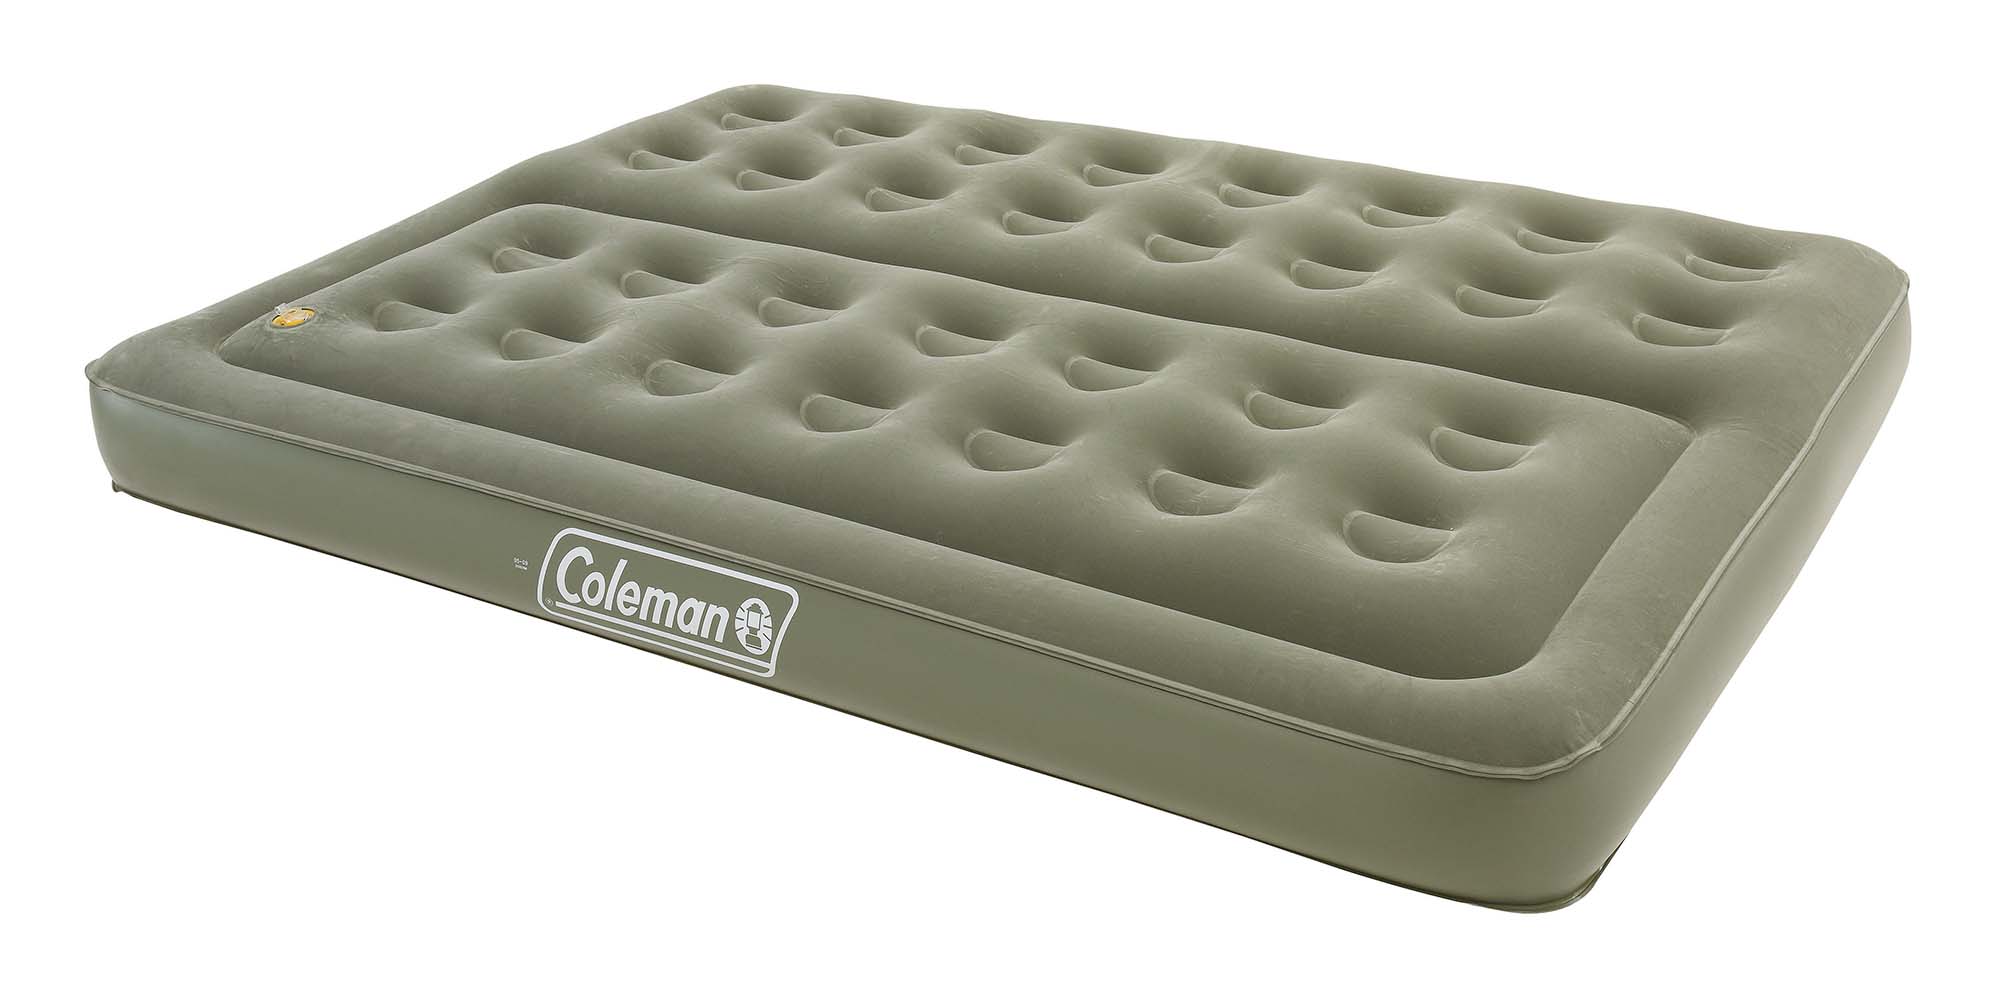 8904361 A durable and sturdy double air mattress. This mattress is made of a high-quality and extra thick PVC without plasticisers. The special composition of the PVC makes for higher resistance to leaks, an extra strong and environmentally friendly air mattress. In addition, the air mattress is equipped with a soft top layer. Comes with repair kit and a sturdy carrying case.